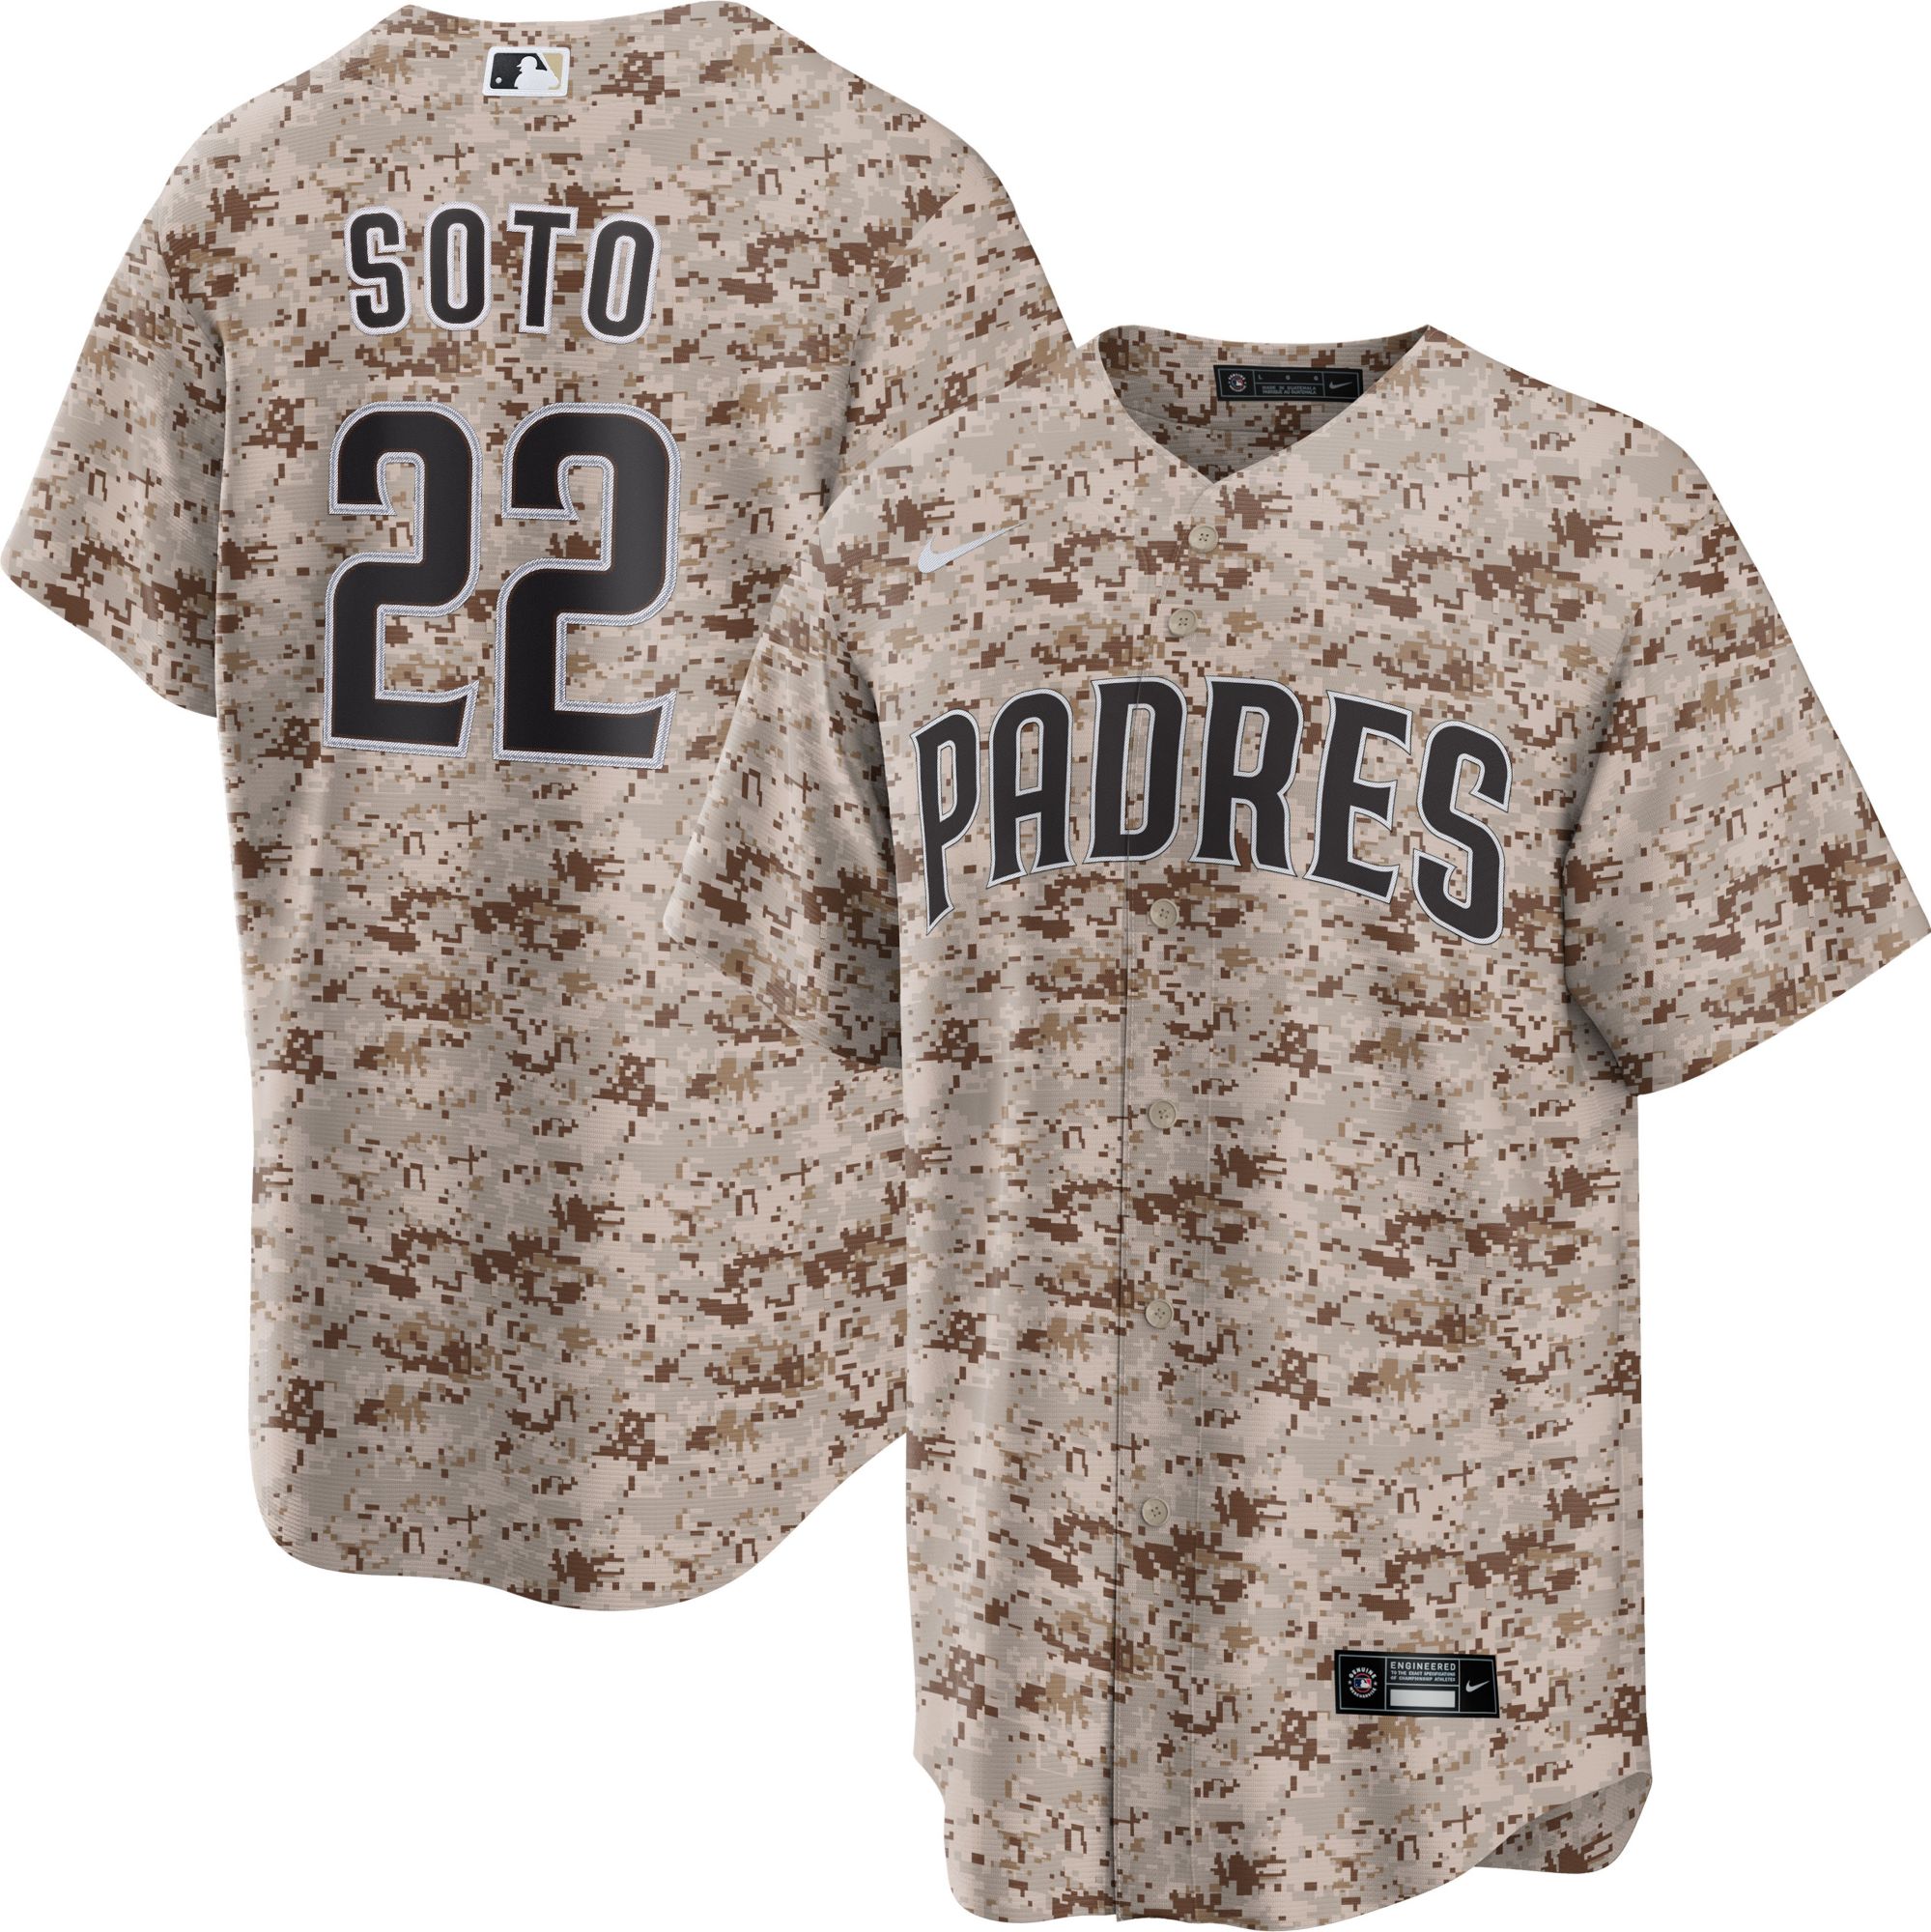 Will Juan Soto be in a Padres uniform in 2024? 🤔